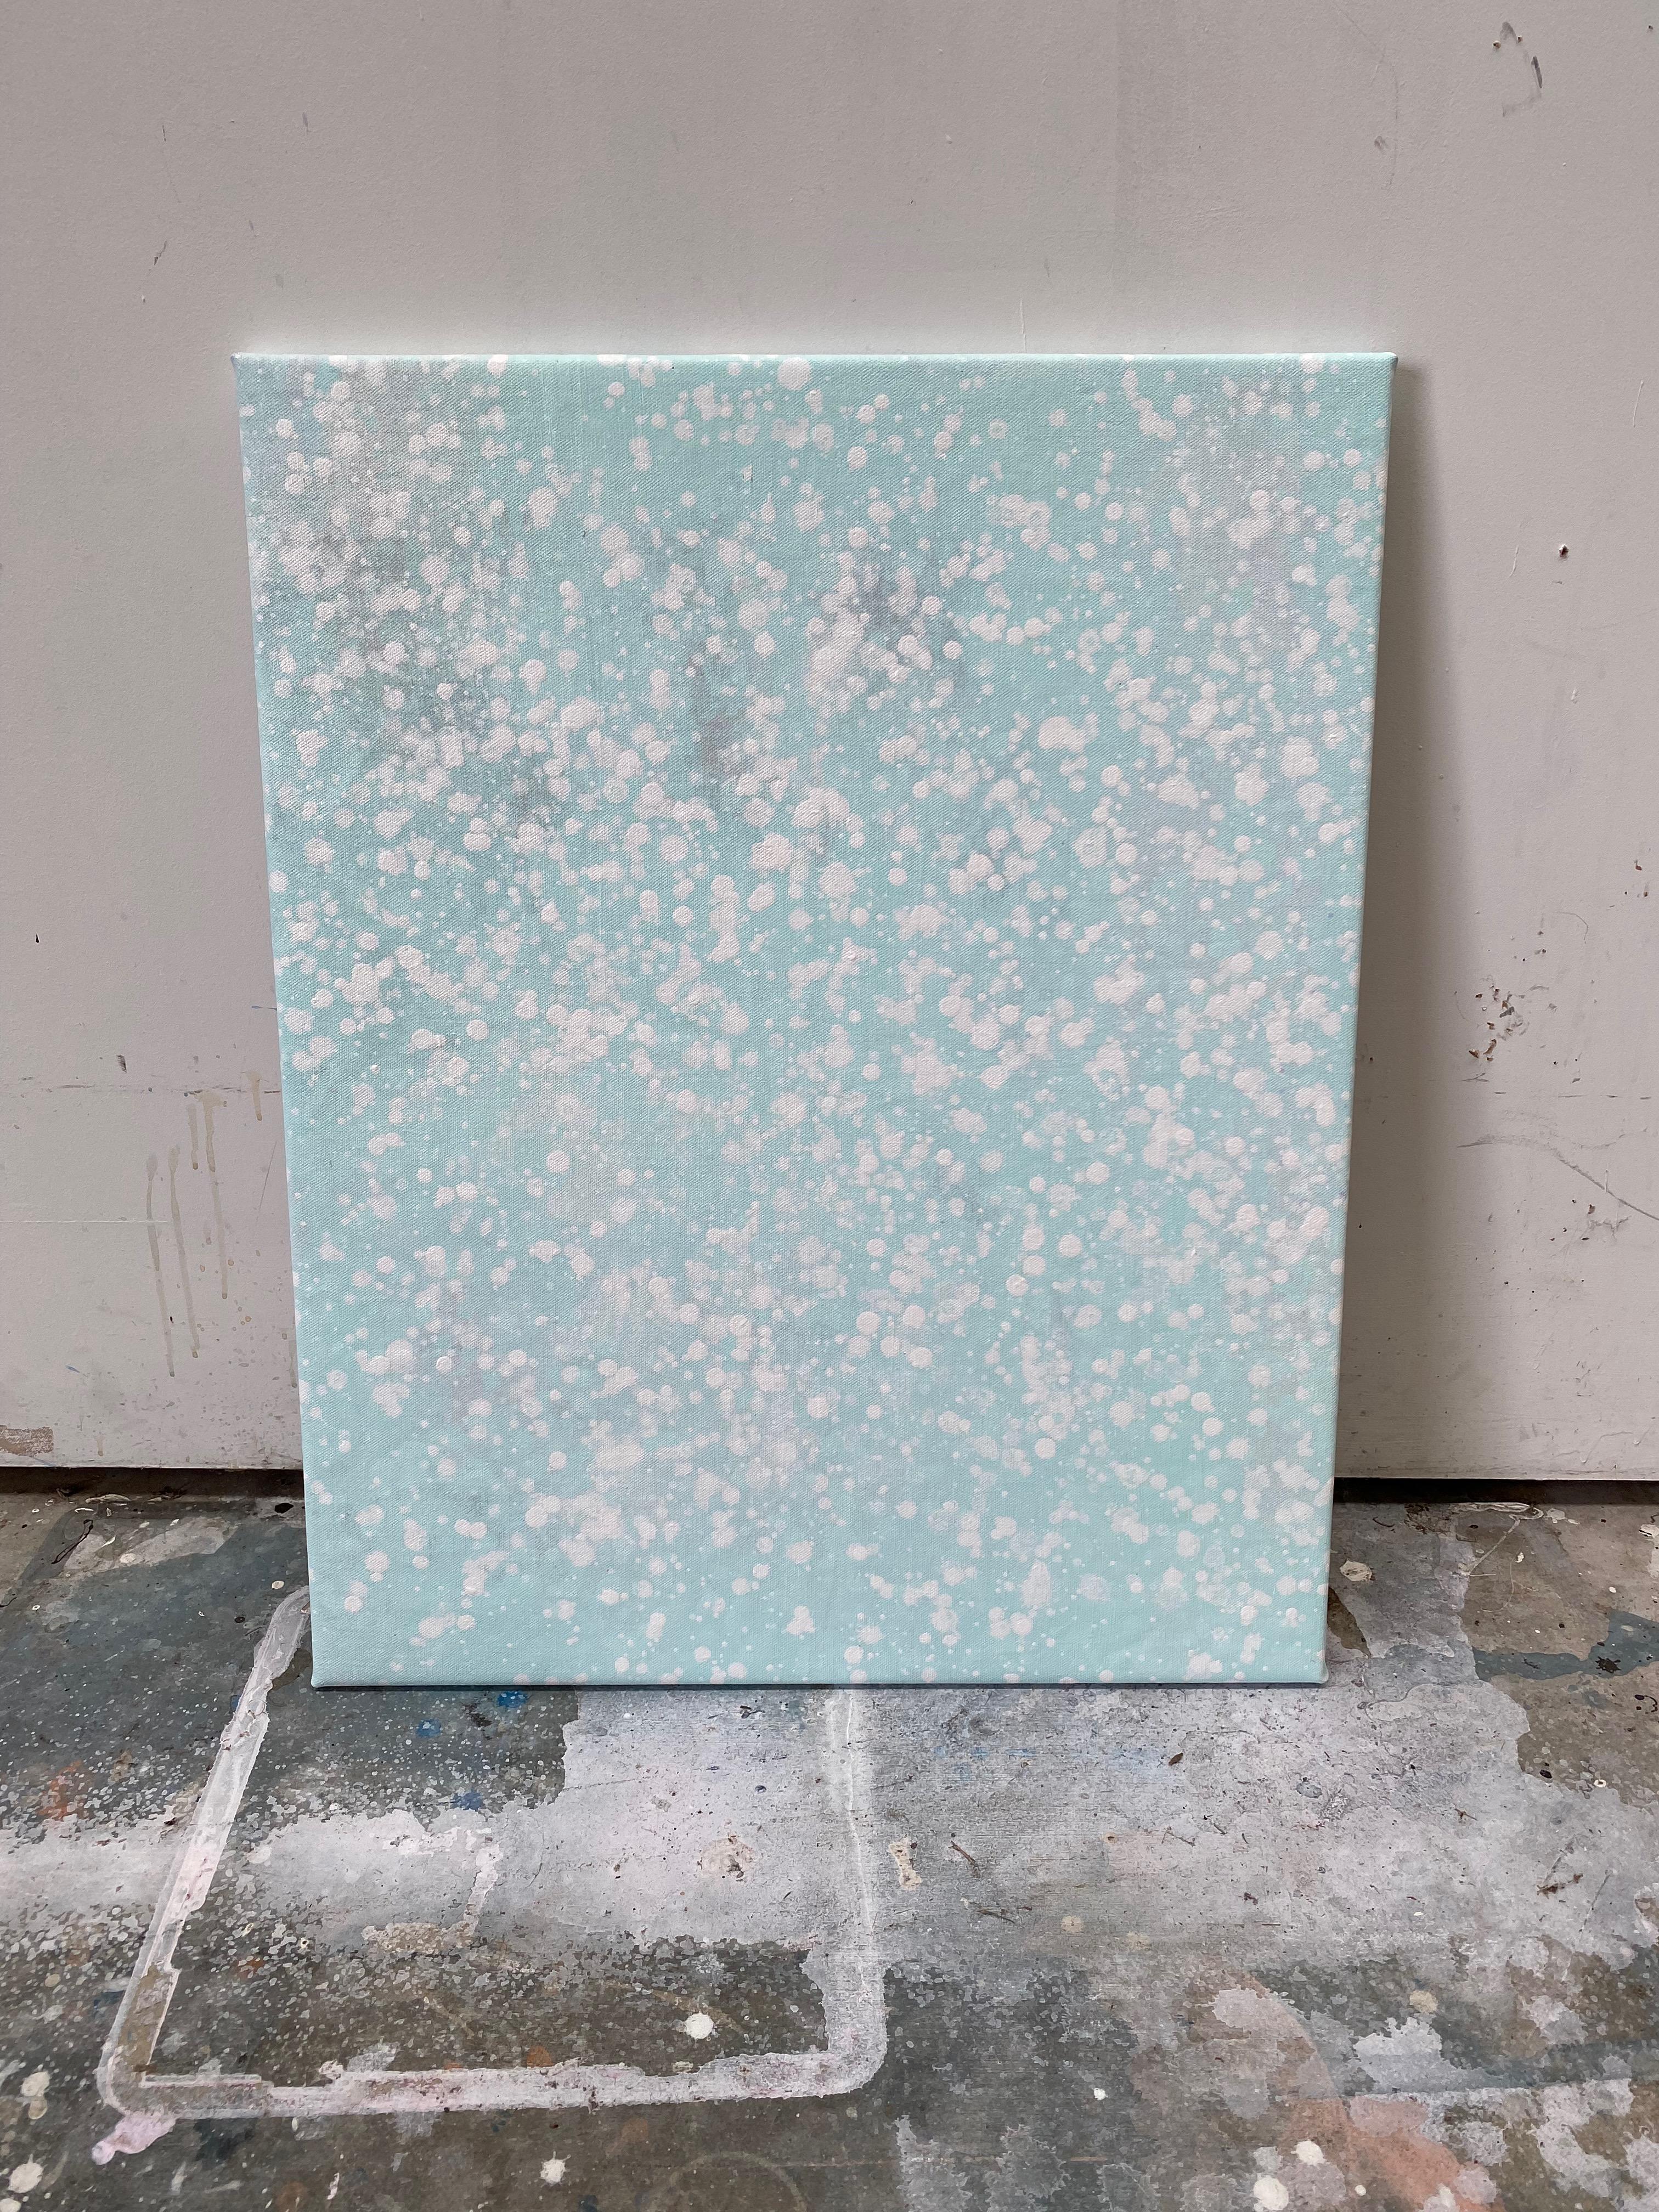 Its snowing pastel mint green dot abstract expressionist painting on linen 3